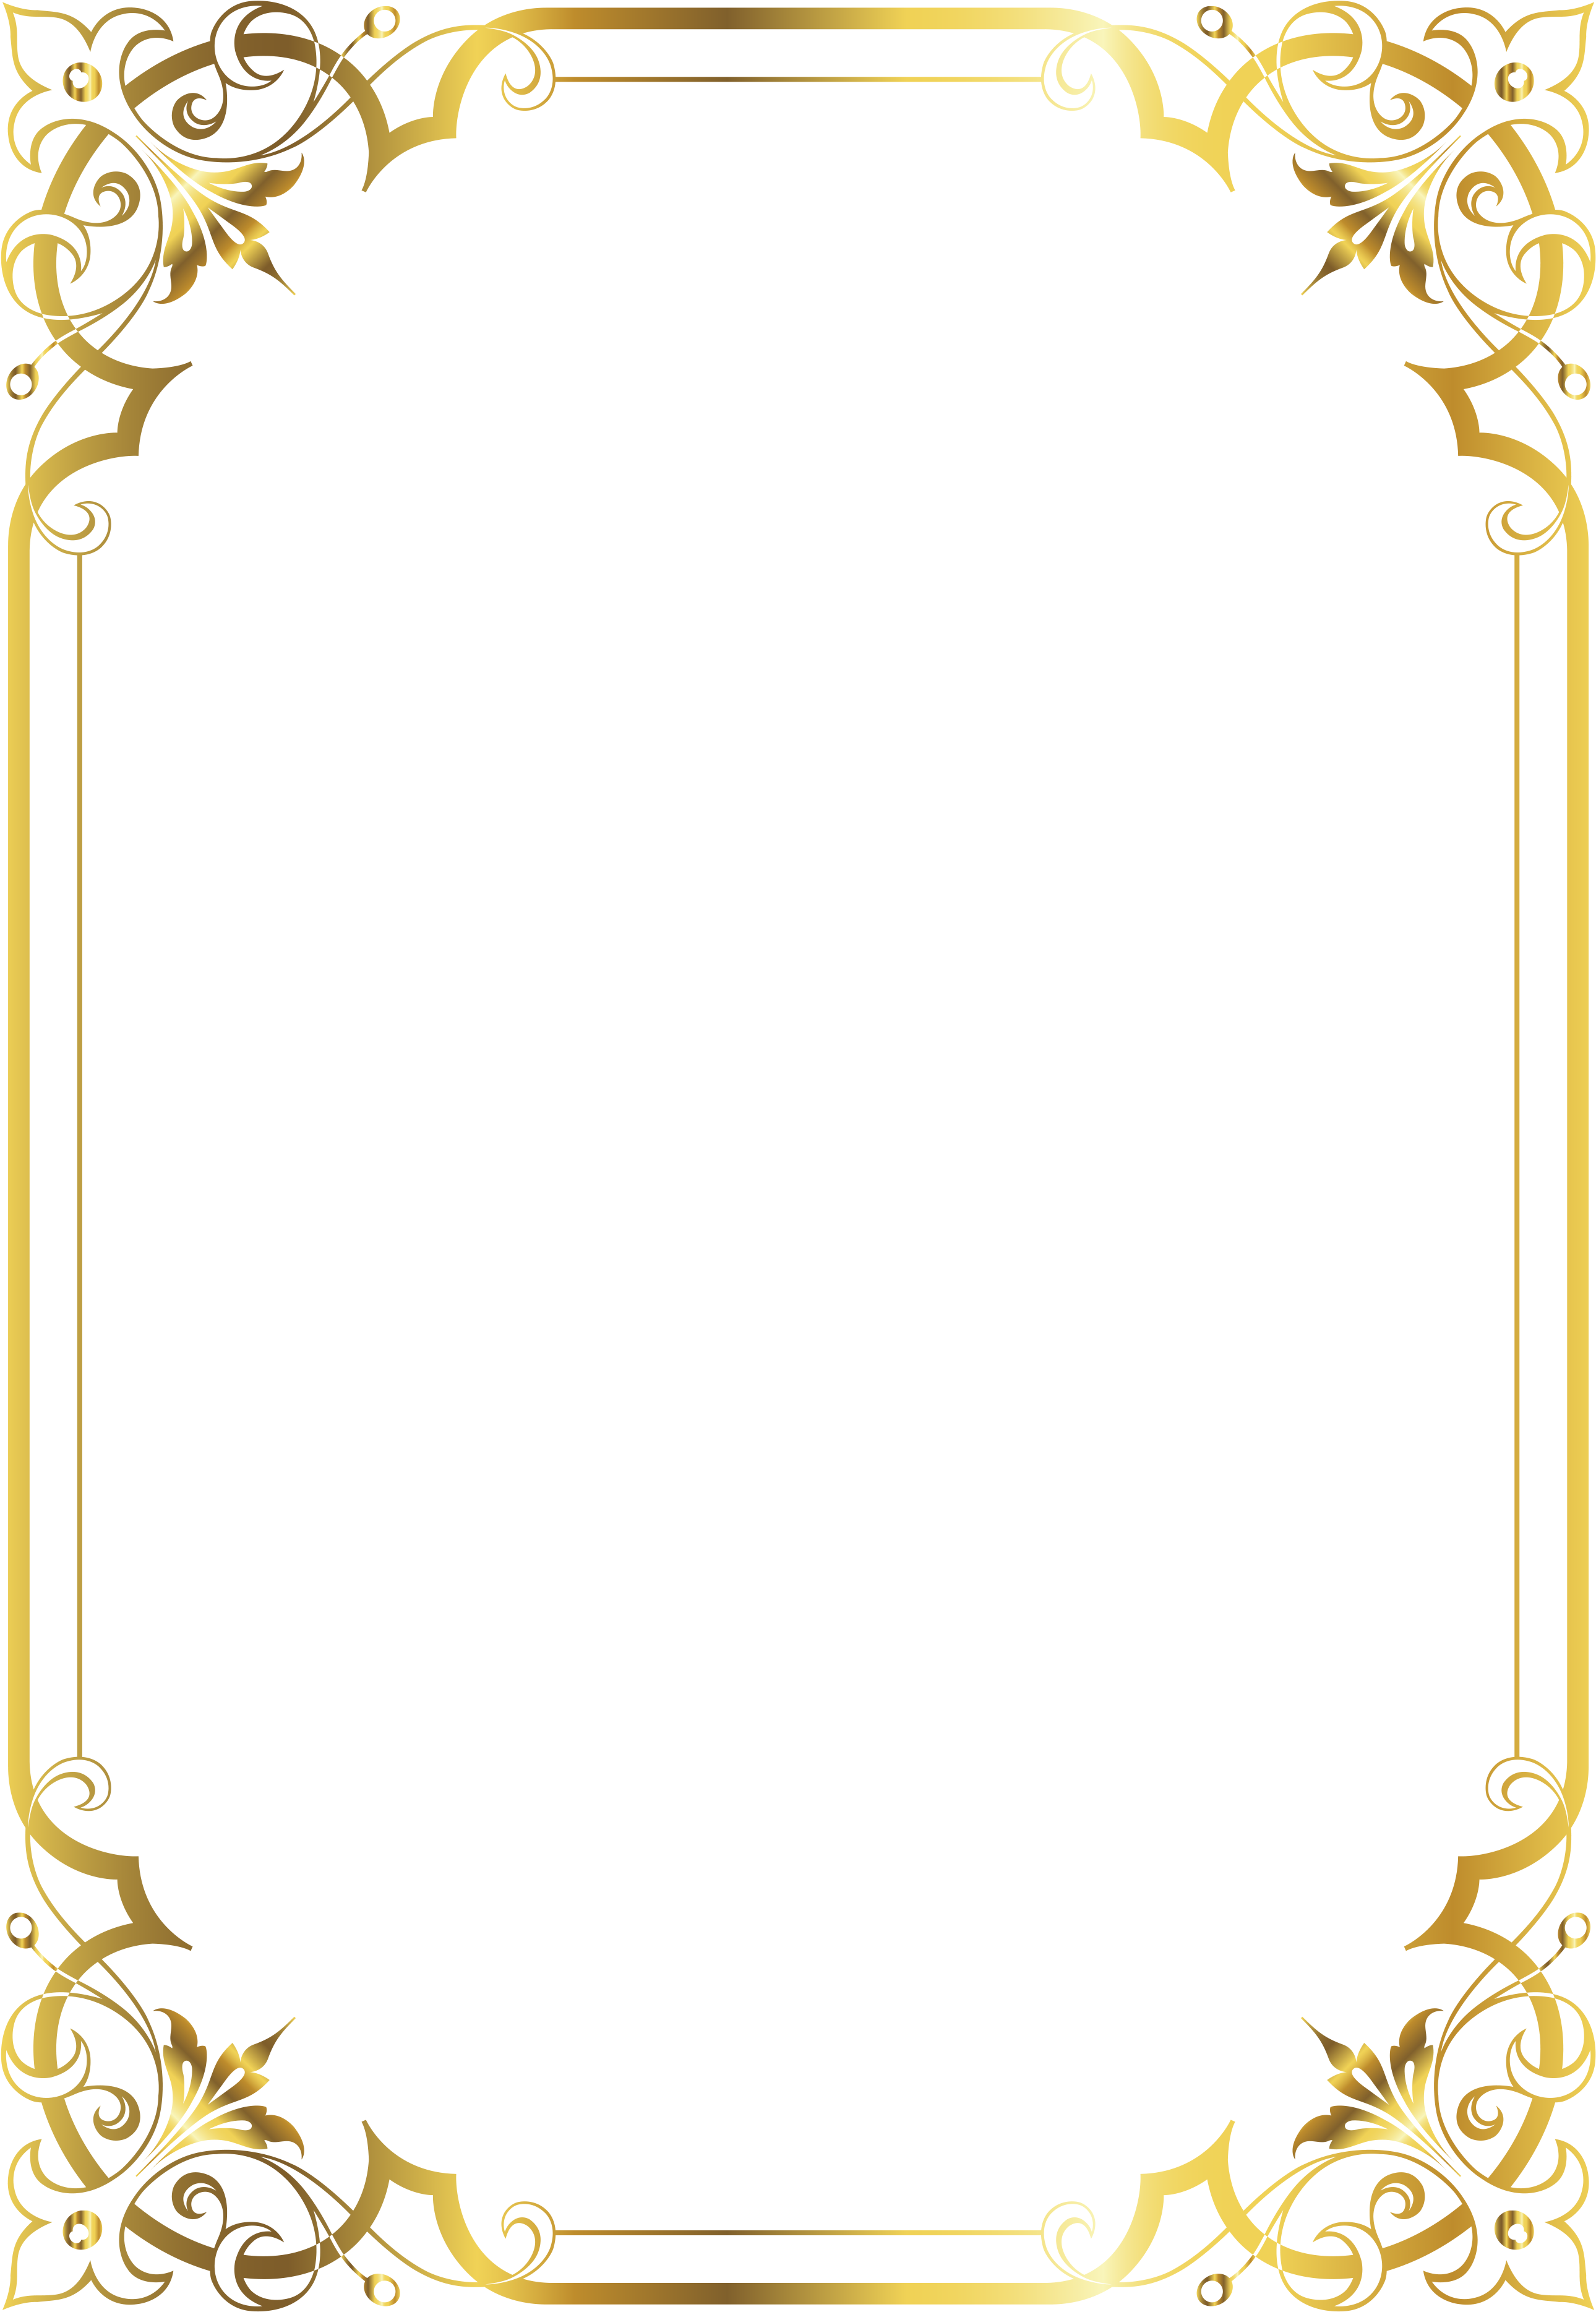 Certificate Border Free PNG Image